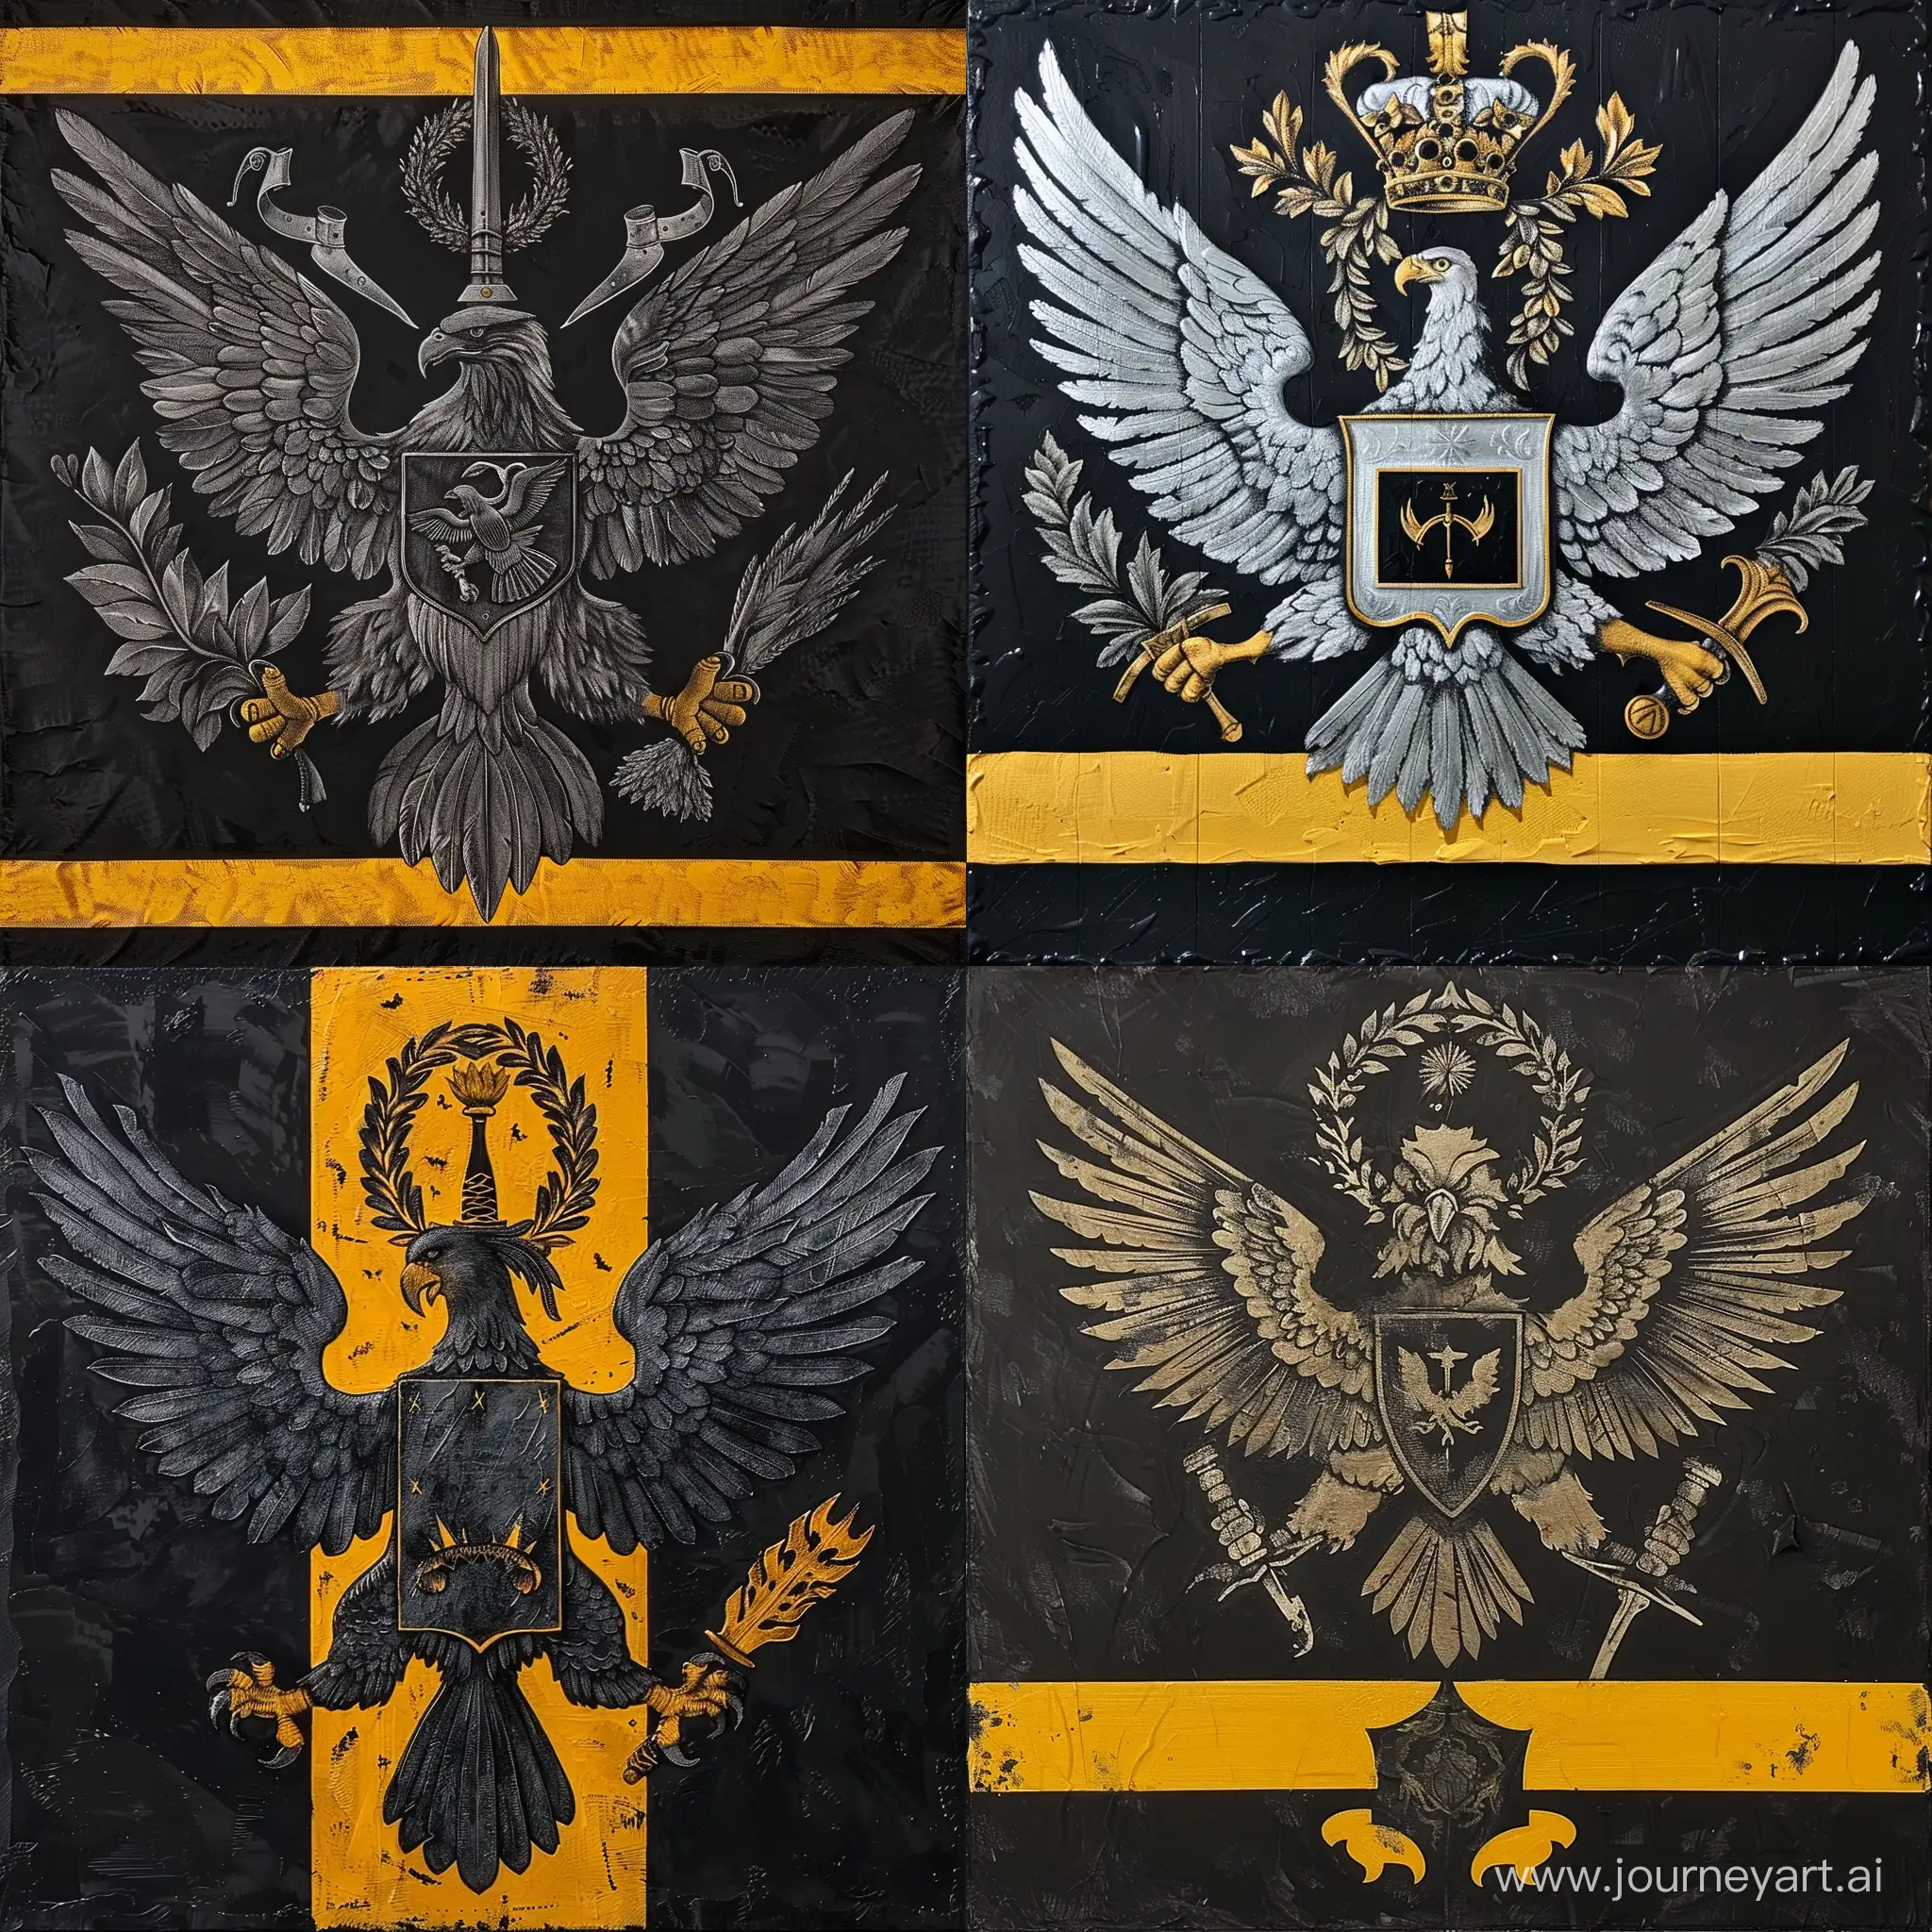 DoubleHeaded-Eagle-Coat-of-Arms-with-Wreath-and-Sword-on-Black-and-Yellow-Background